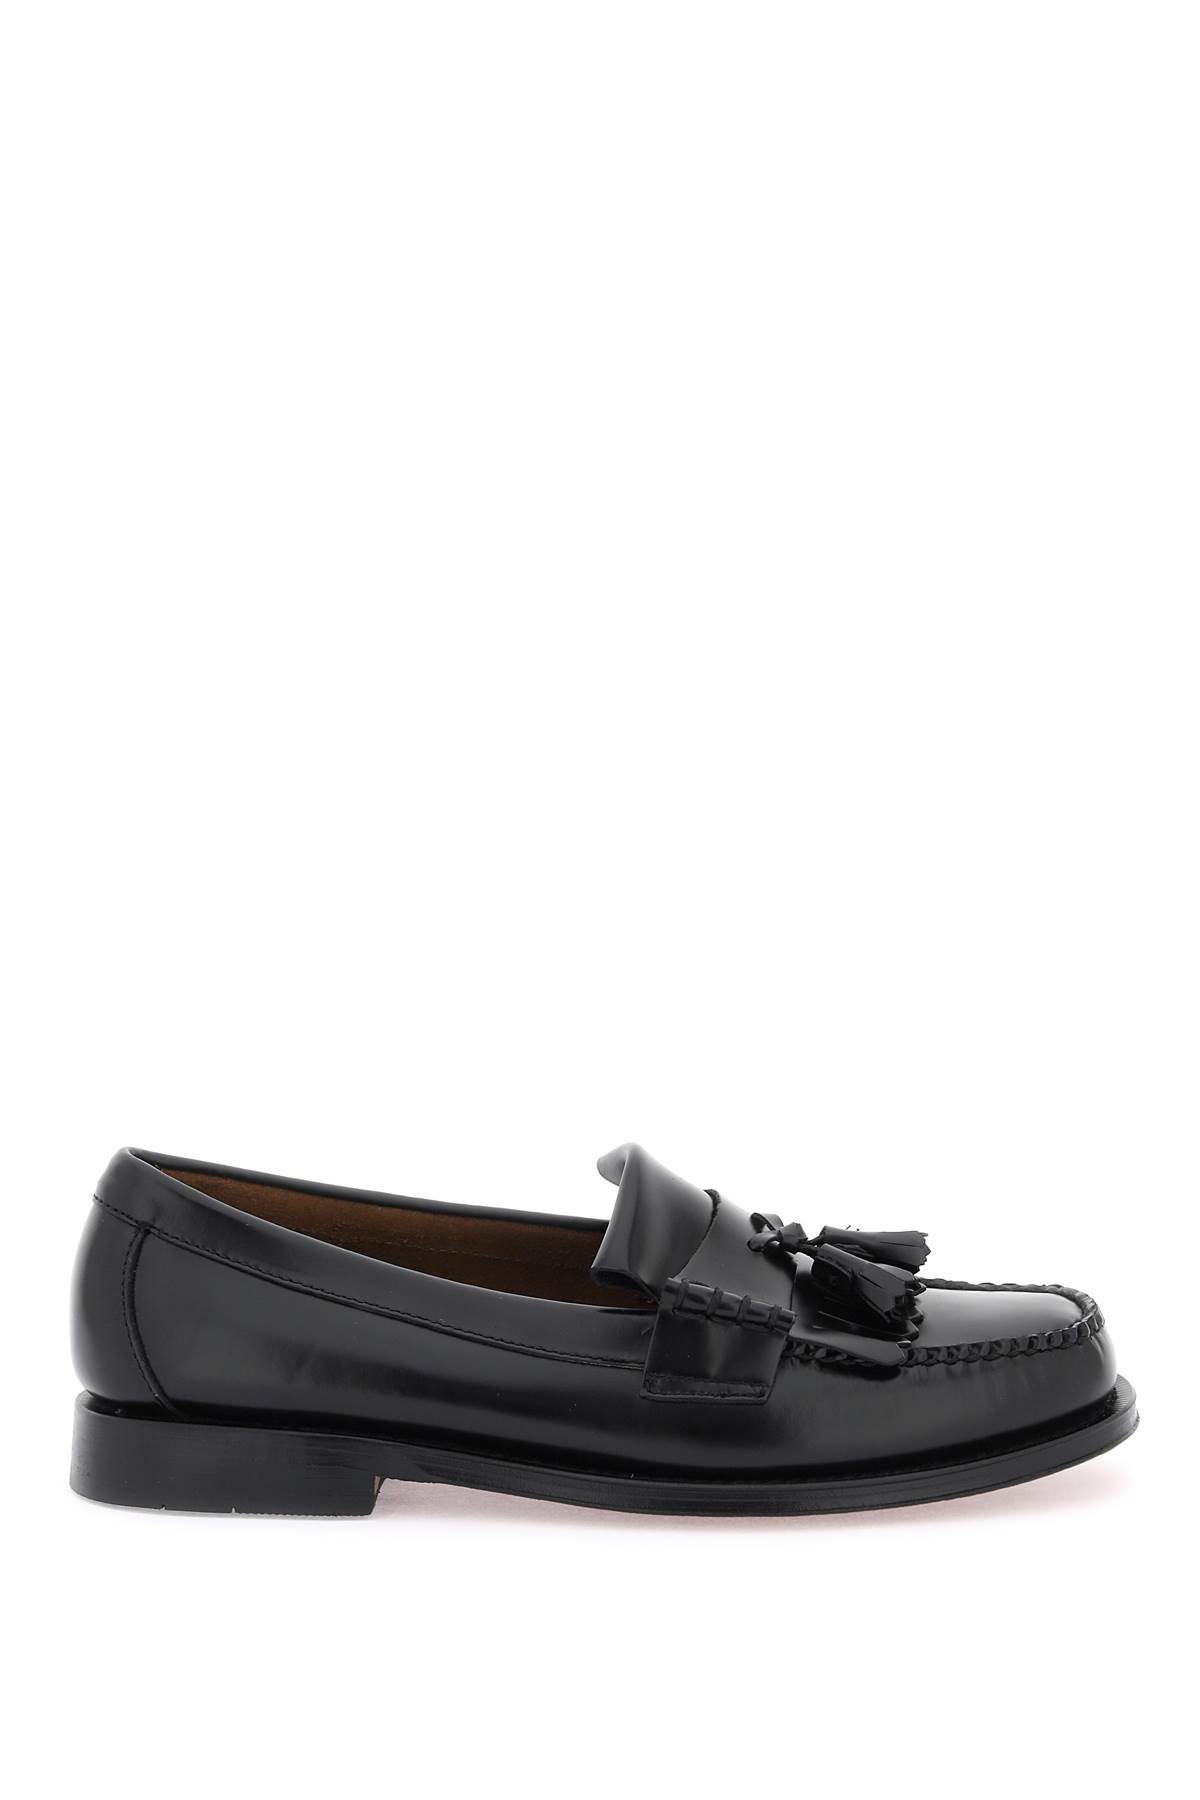 G.H.Bass & Co. Esther Kiltie Weejuns Loafers